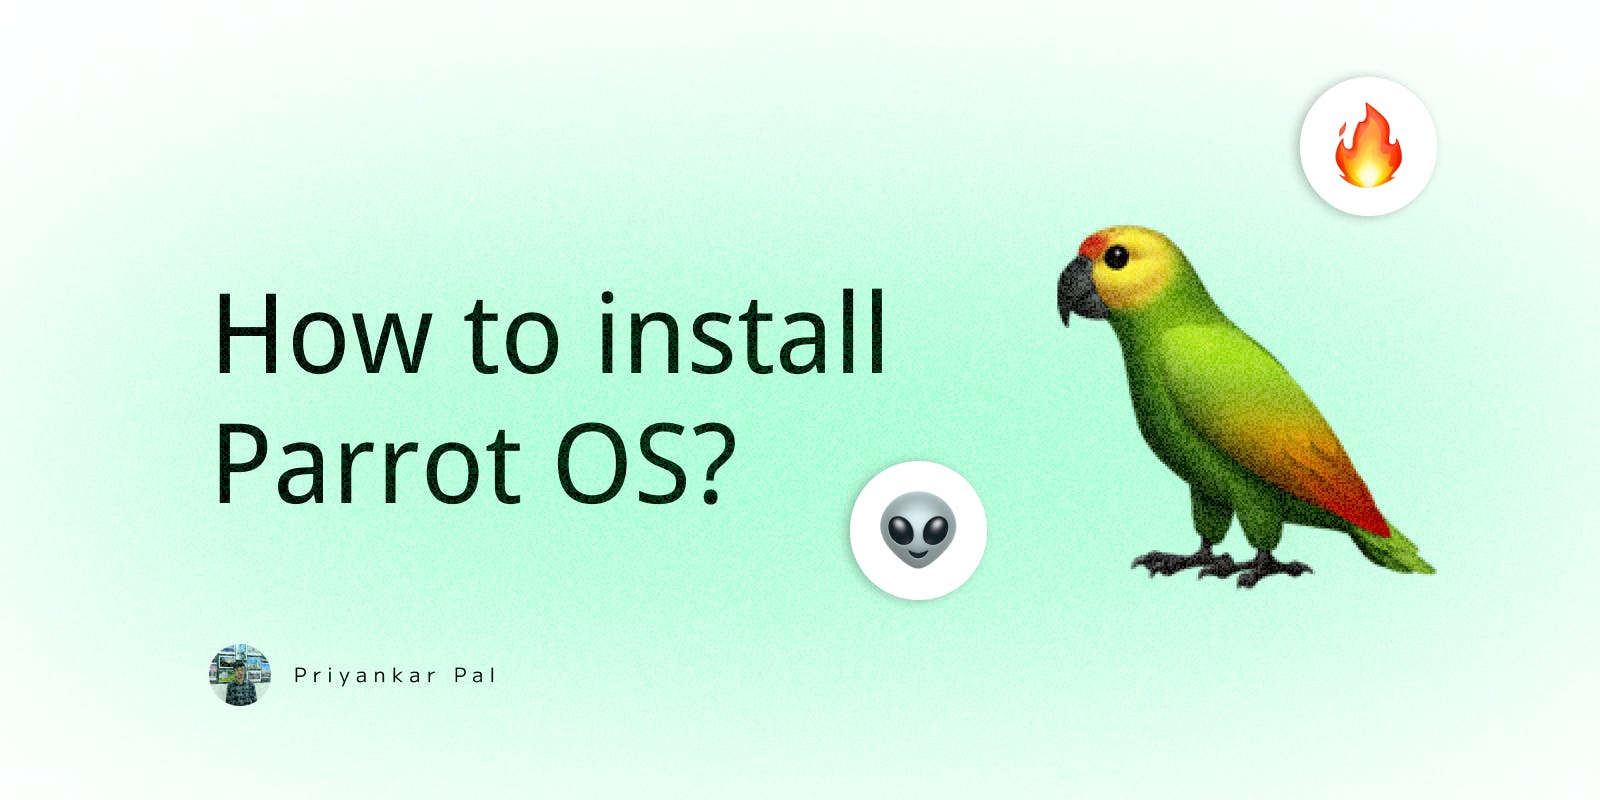 How to Boot Parrot OS?